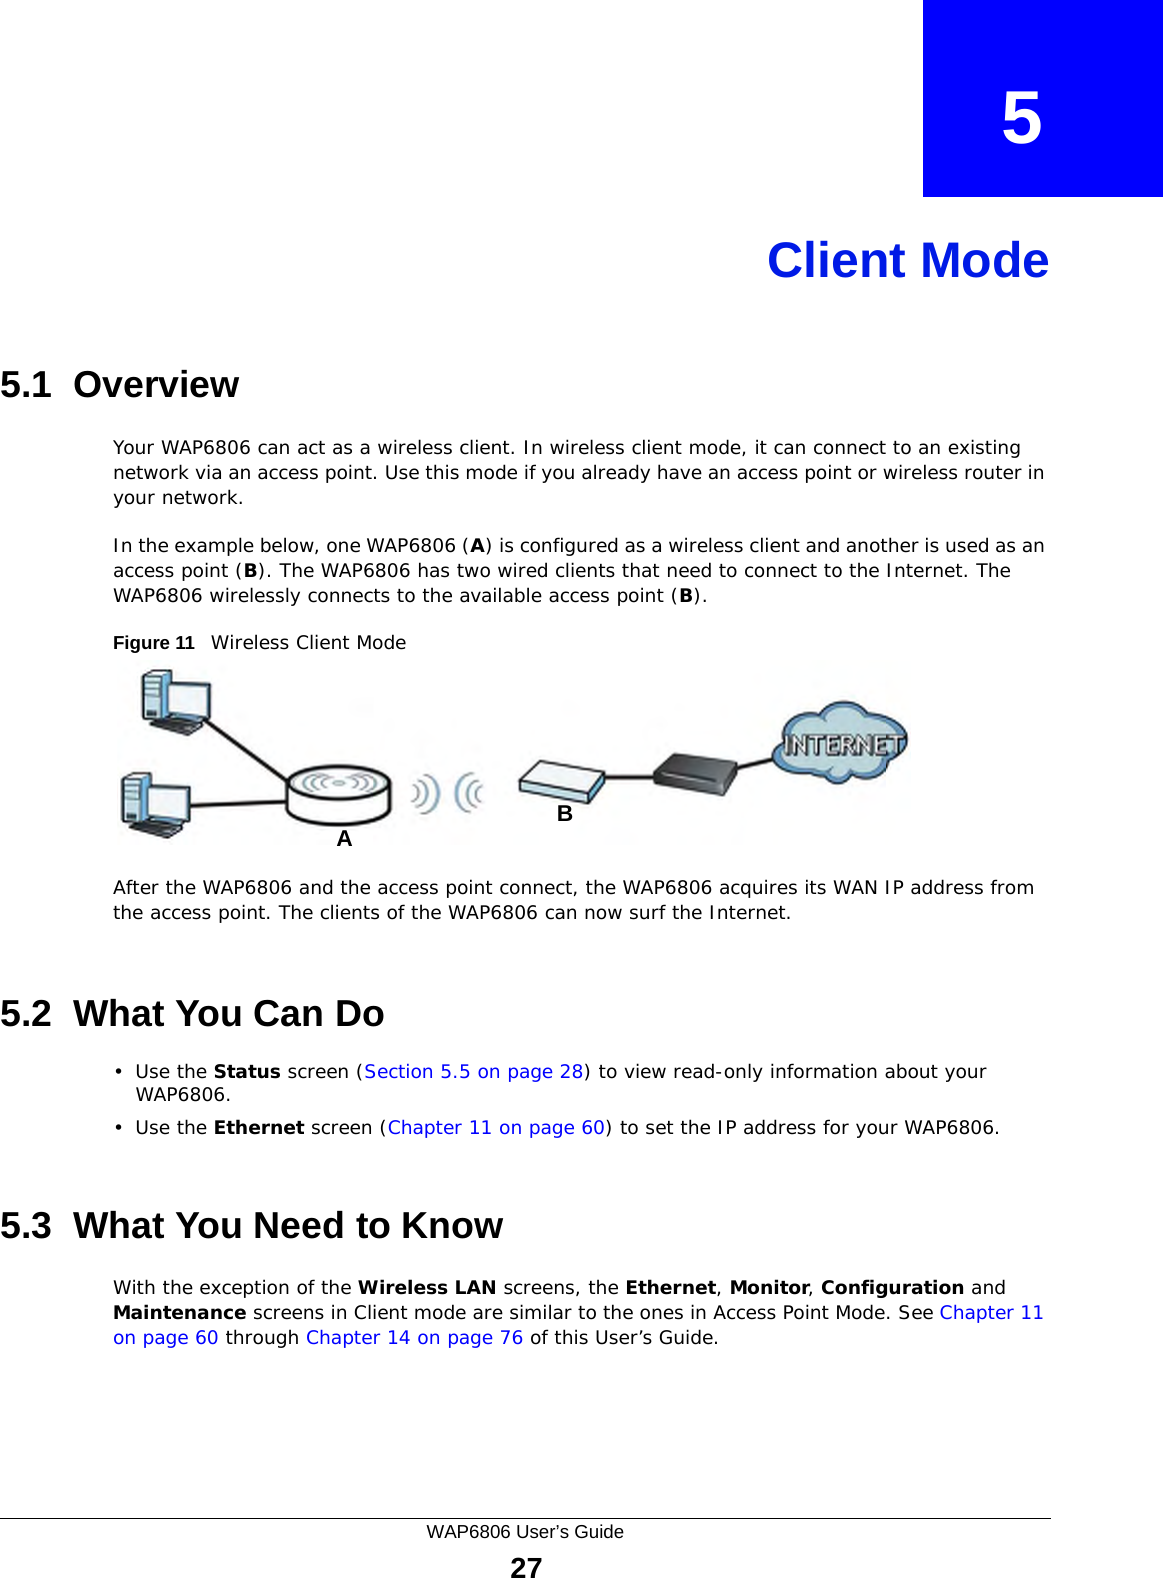 WAP6806 User’s Guide27CHAPTER   5Client Mode5.1  OverviewYour WAP6806 can act as a wireless client. In wireless client mode, it can connect to an existing network via an access point. Use this mode if you already have an access point or wireless router in your network.In the example below, one WAP6806 (A) is configured as a wireless client and another is used as an access point (B). The WAP6806 has two wired clients that need to connect to the Internet. The WAP6806 wirelessly connects to the available access point (B). Figure 11   Wireless Client ModeAfter the WAP6806 and the access point connect, the WAP6806 acquires its WAN IP address from the access point. The clients of the WAP6806 can now surf the Internet. 5.2  What You Can Do•Use the Status screen (Section 5.5 on page 28) to view read-only information about your WAP6806.•Use the Ethernet screen (Chapter 11 on page 60) to set the IP address for your WAP6806.5.3  What You Need to KnowWith the exception of the Wireless LAN screens, the Ethernet, Monitor, Configuration and Maintenance screens in Client mode are similar to the ones in Access Point Mode. See Chapter 11 on page 60 through Chapter 14 on page 76 of this User’s Guide.AB